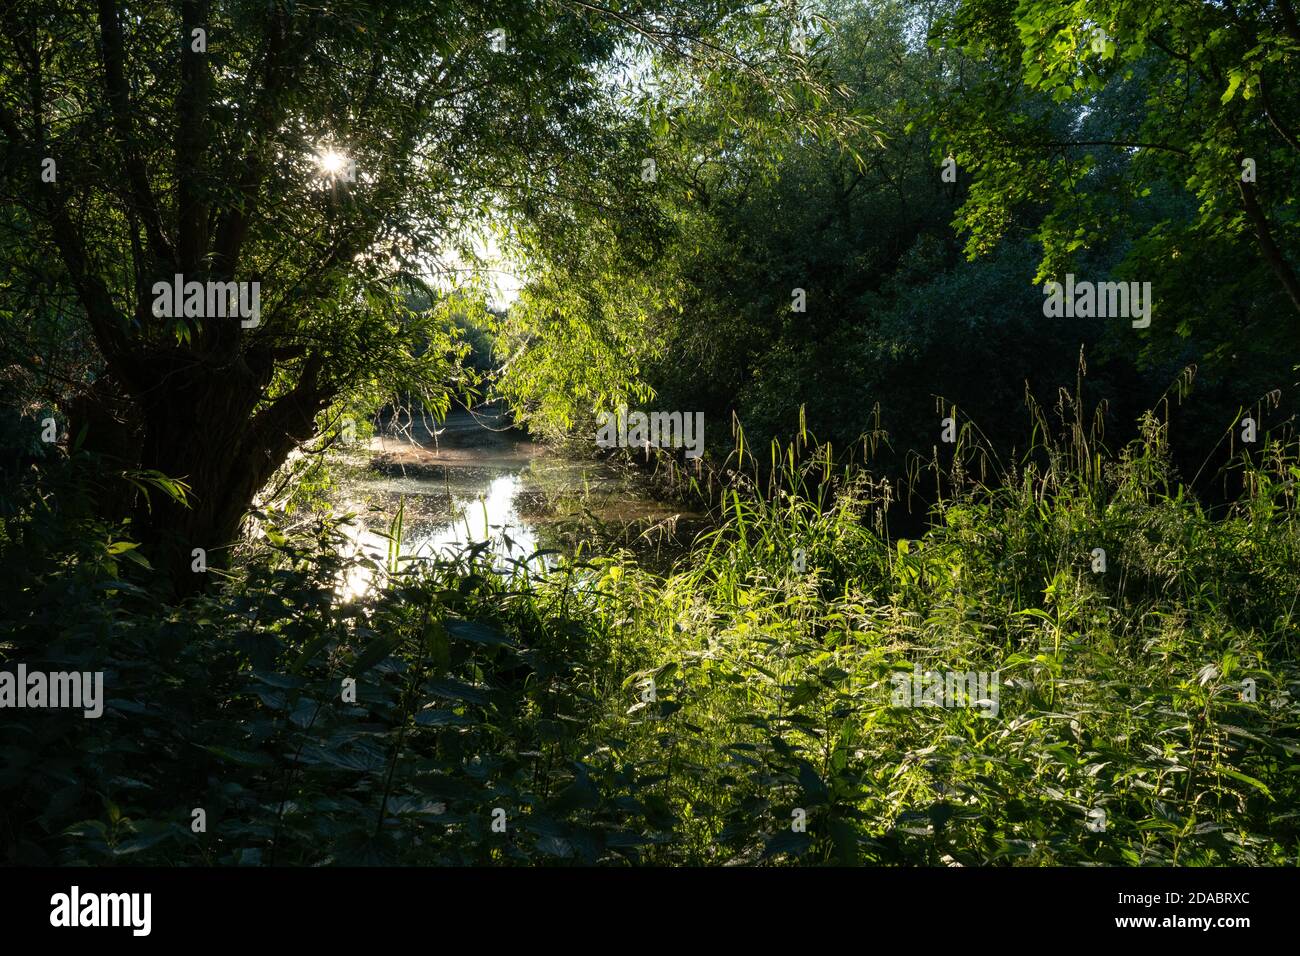 Sun light shining through trees and reeds magical atmosphere over lake Stock Photo